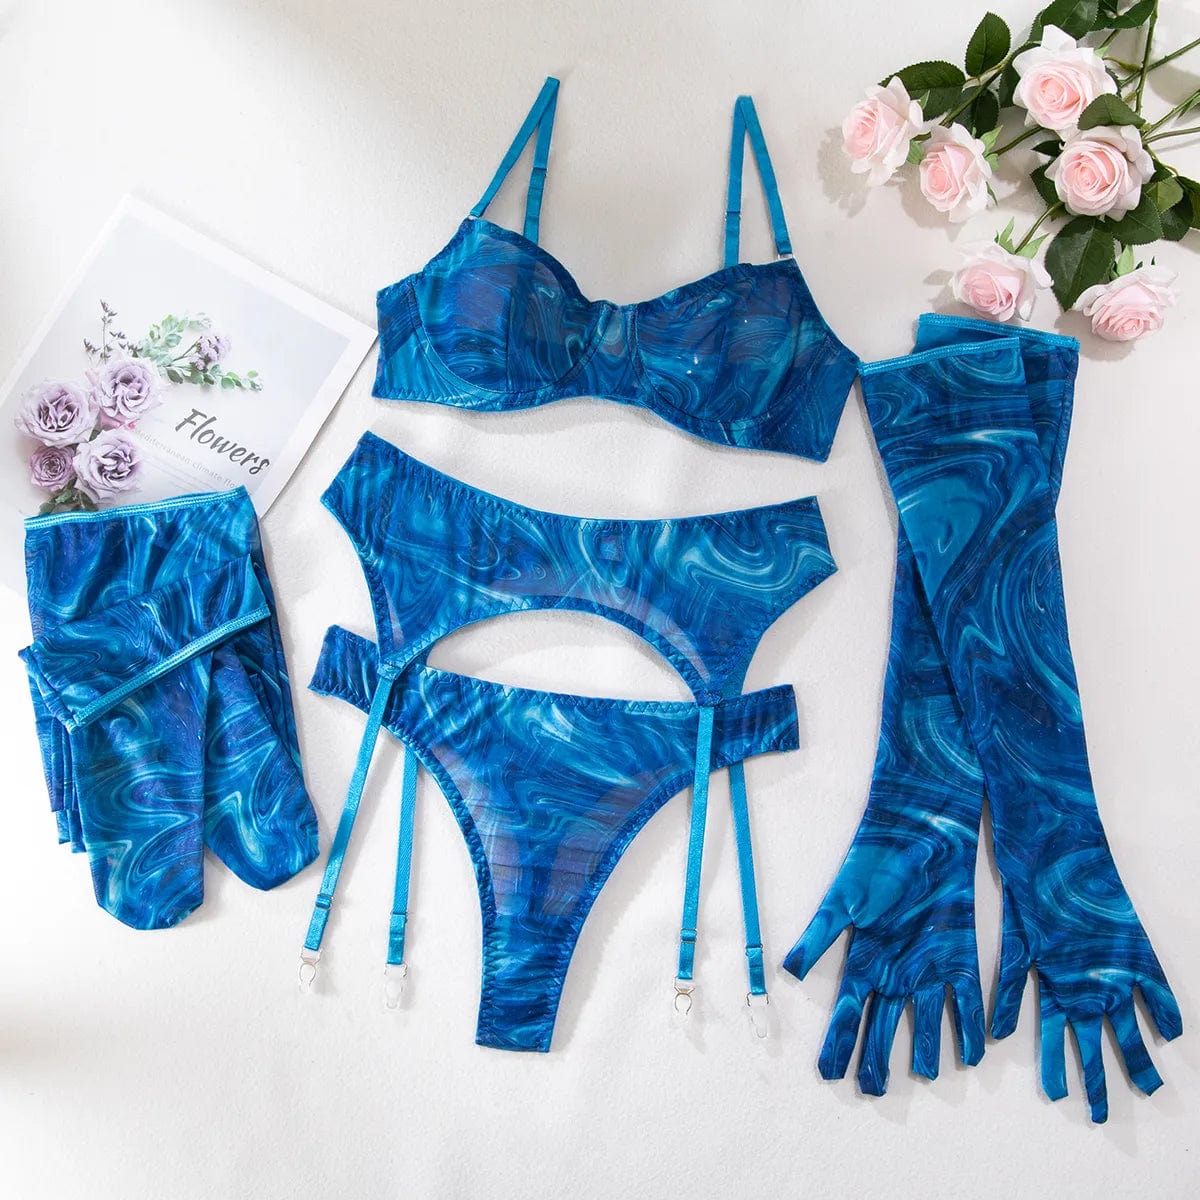 Kinky Cloth Full Blue / S Tie-Dyed Print Lingerie